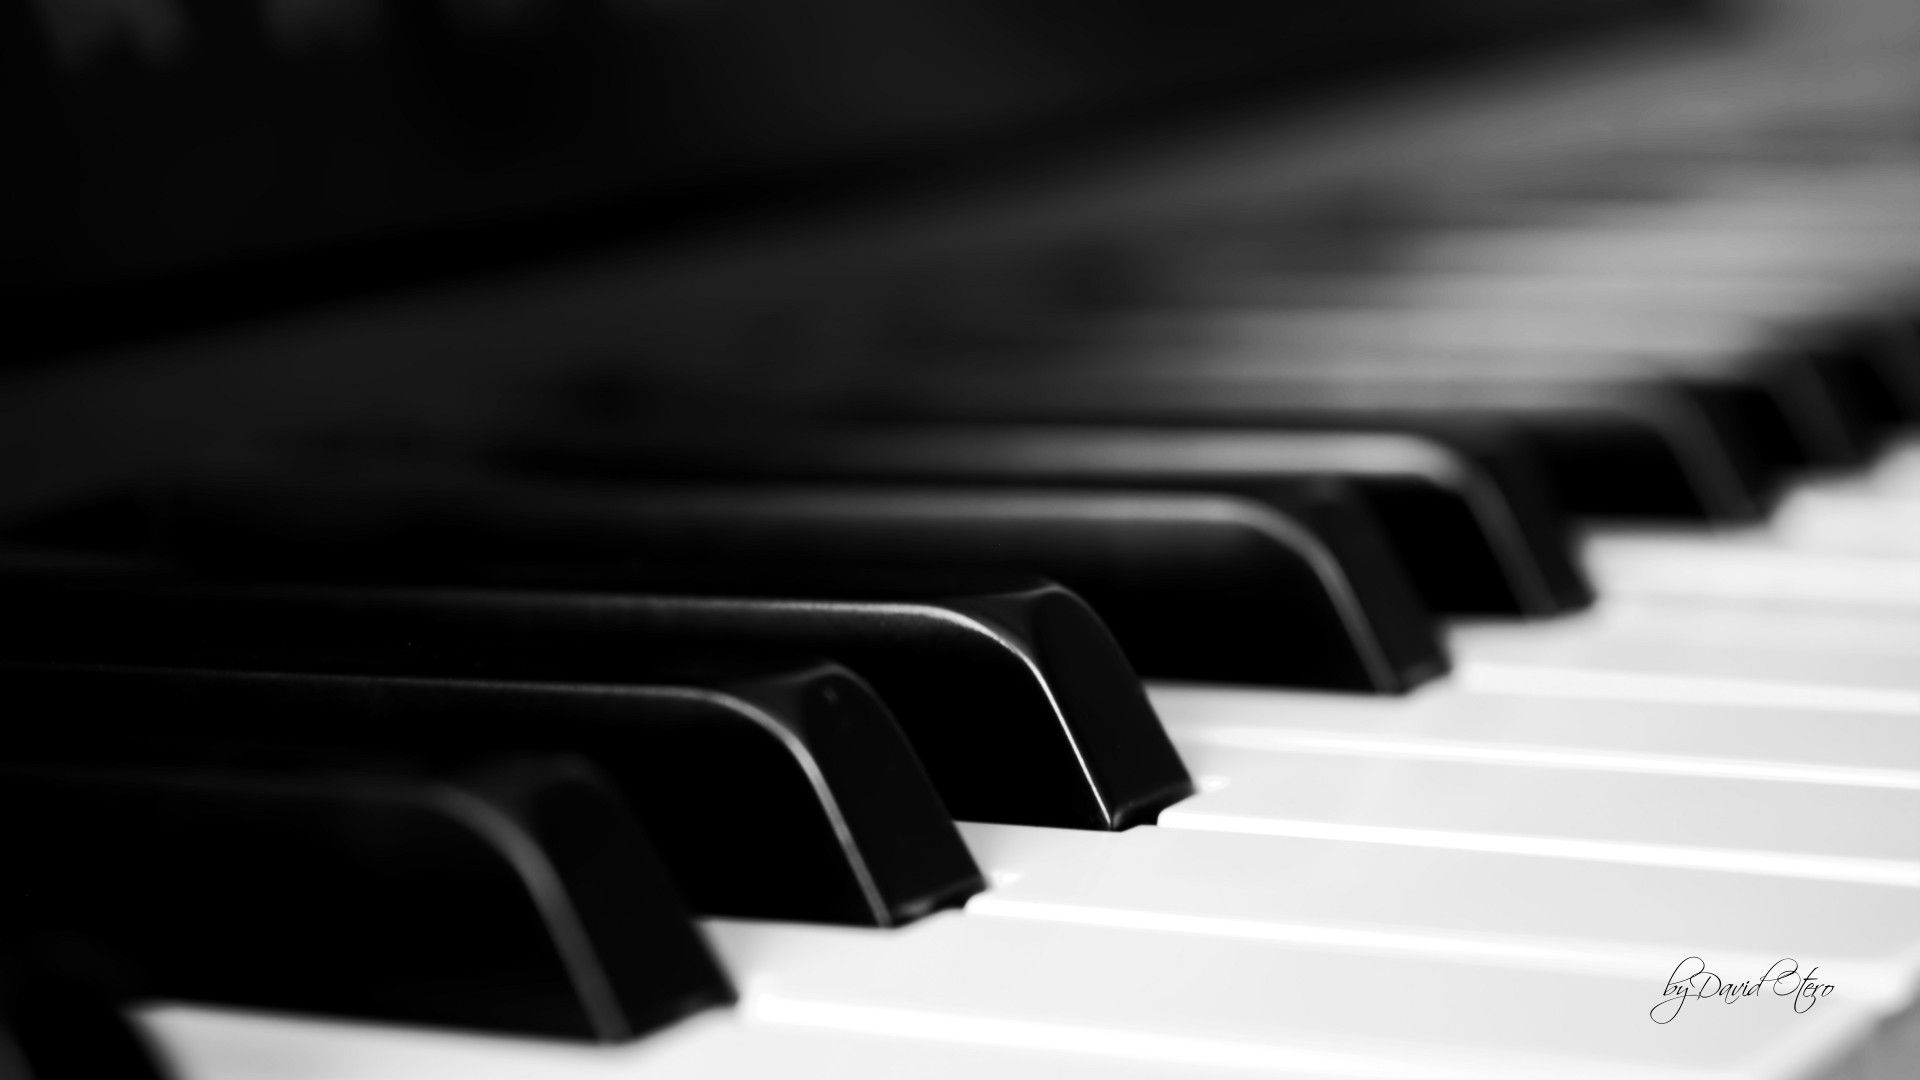 Top Piano Desktop Backgrounds Animation Images for Pinterest